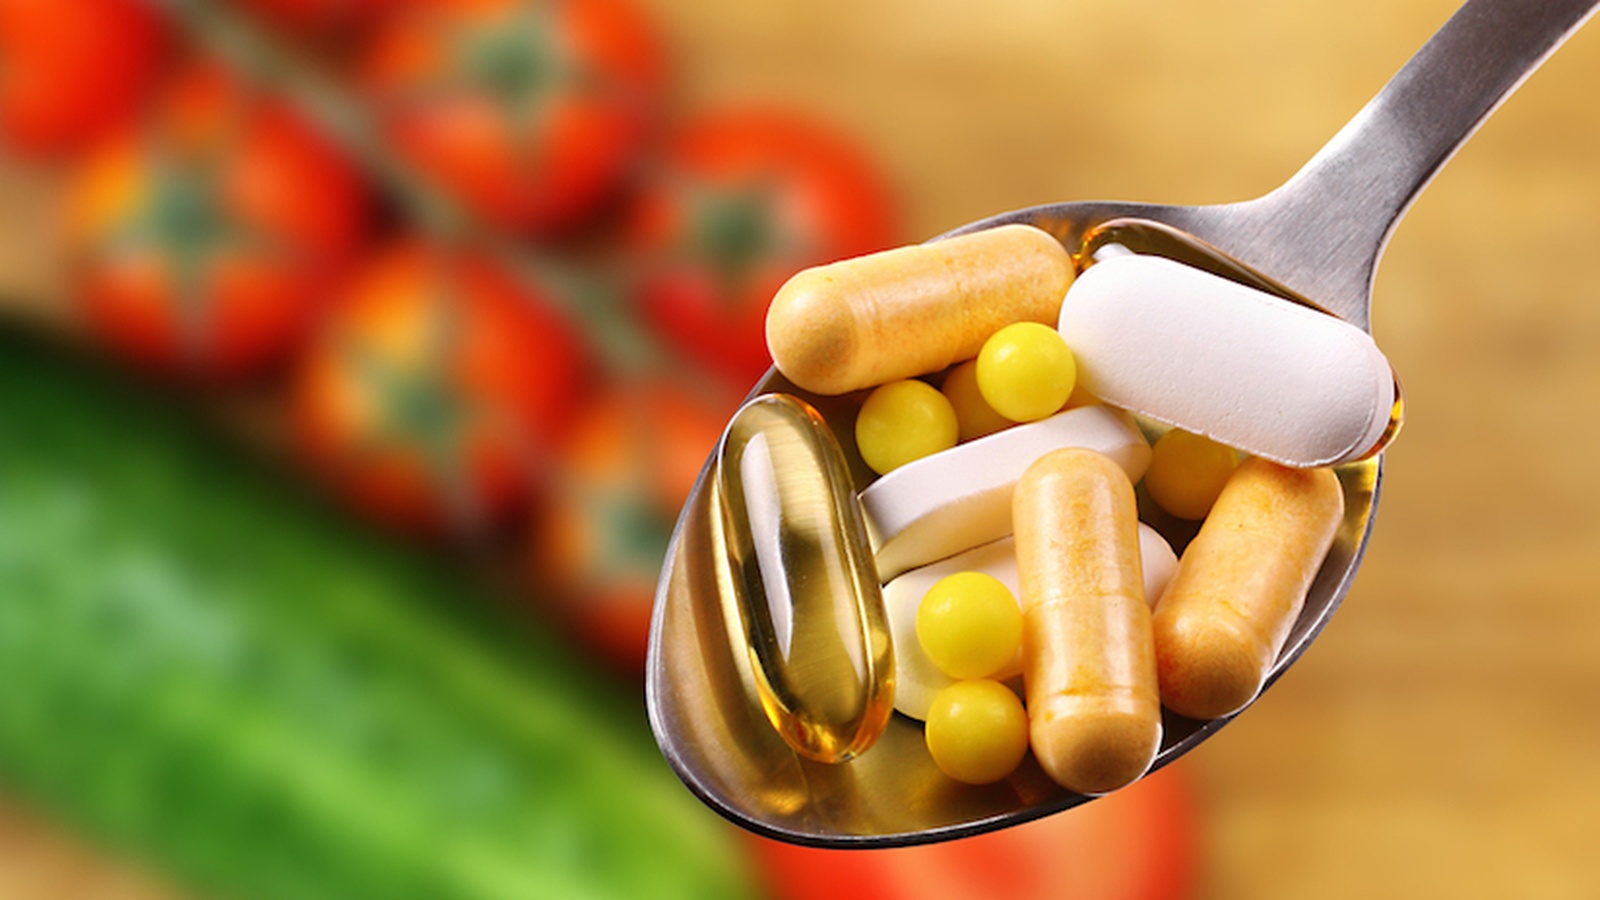 Doctors Say Vitamins are Safe and Effective